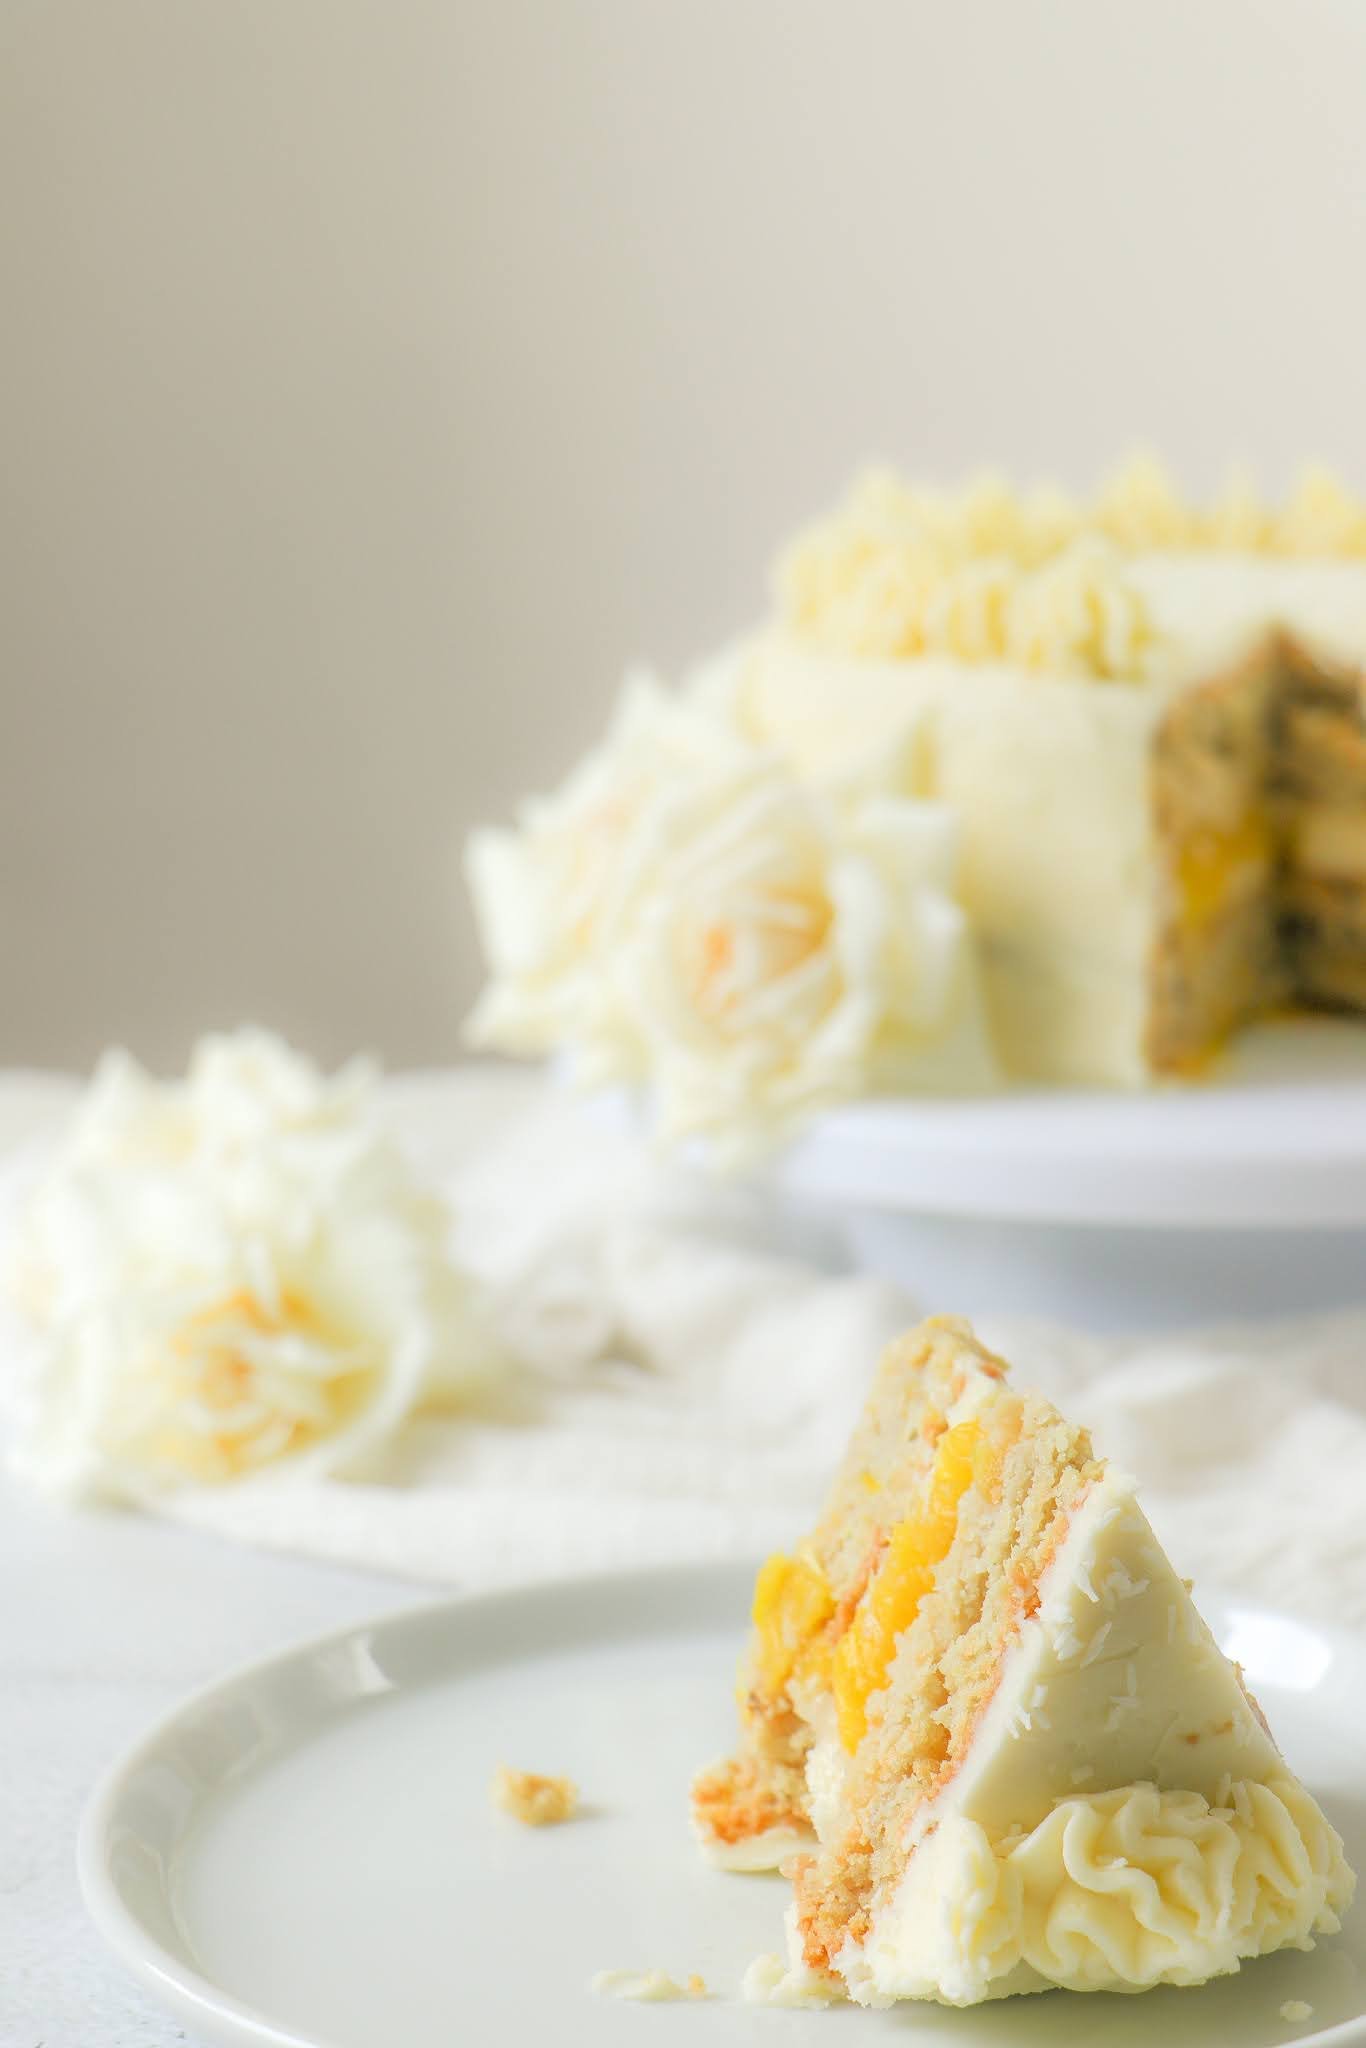 Pineapple Coconut Cake + step by step VIDEO - The Recipe Rebel